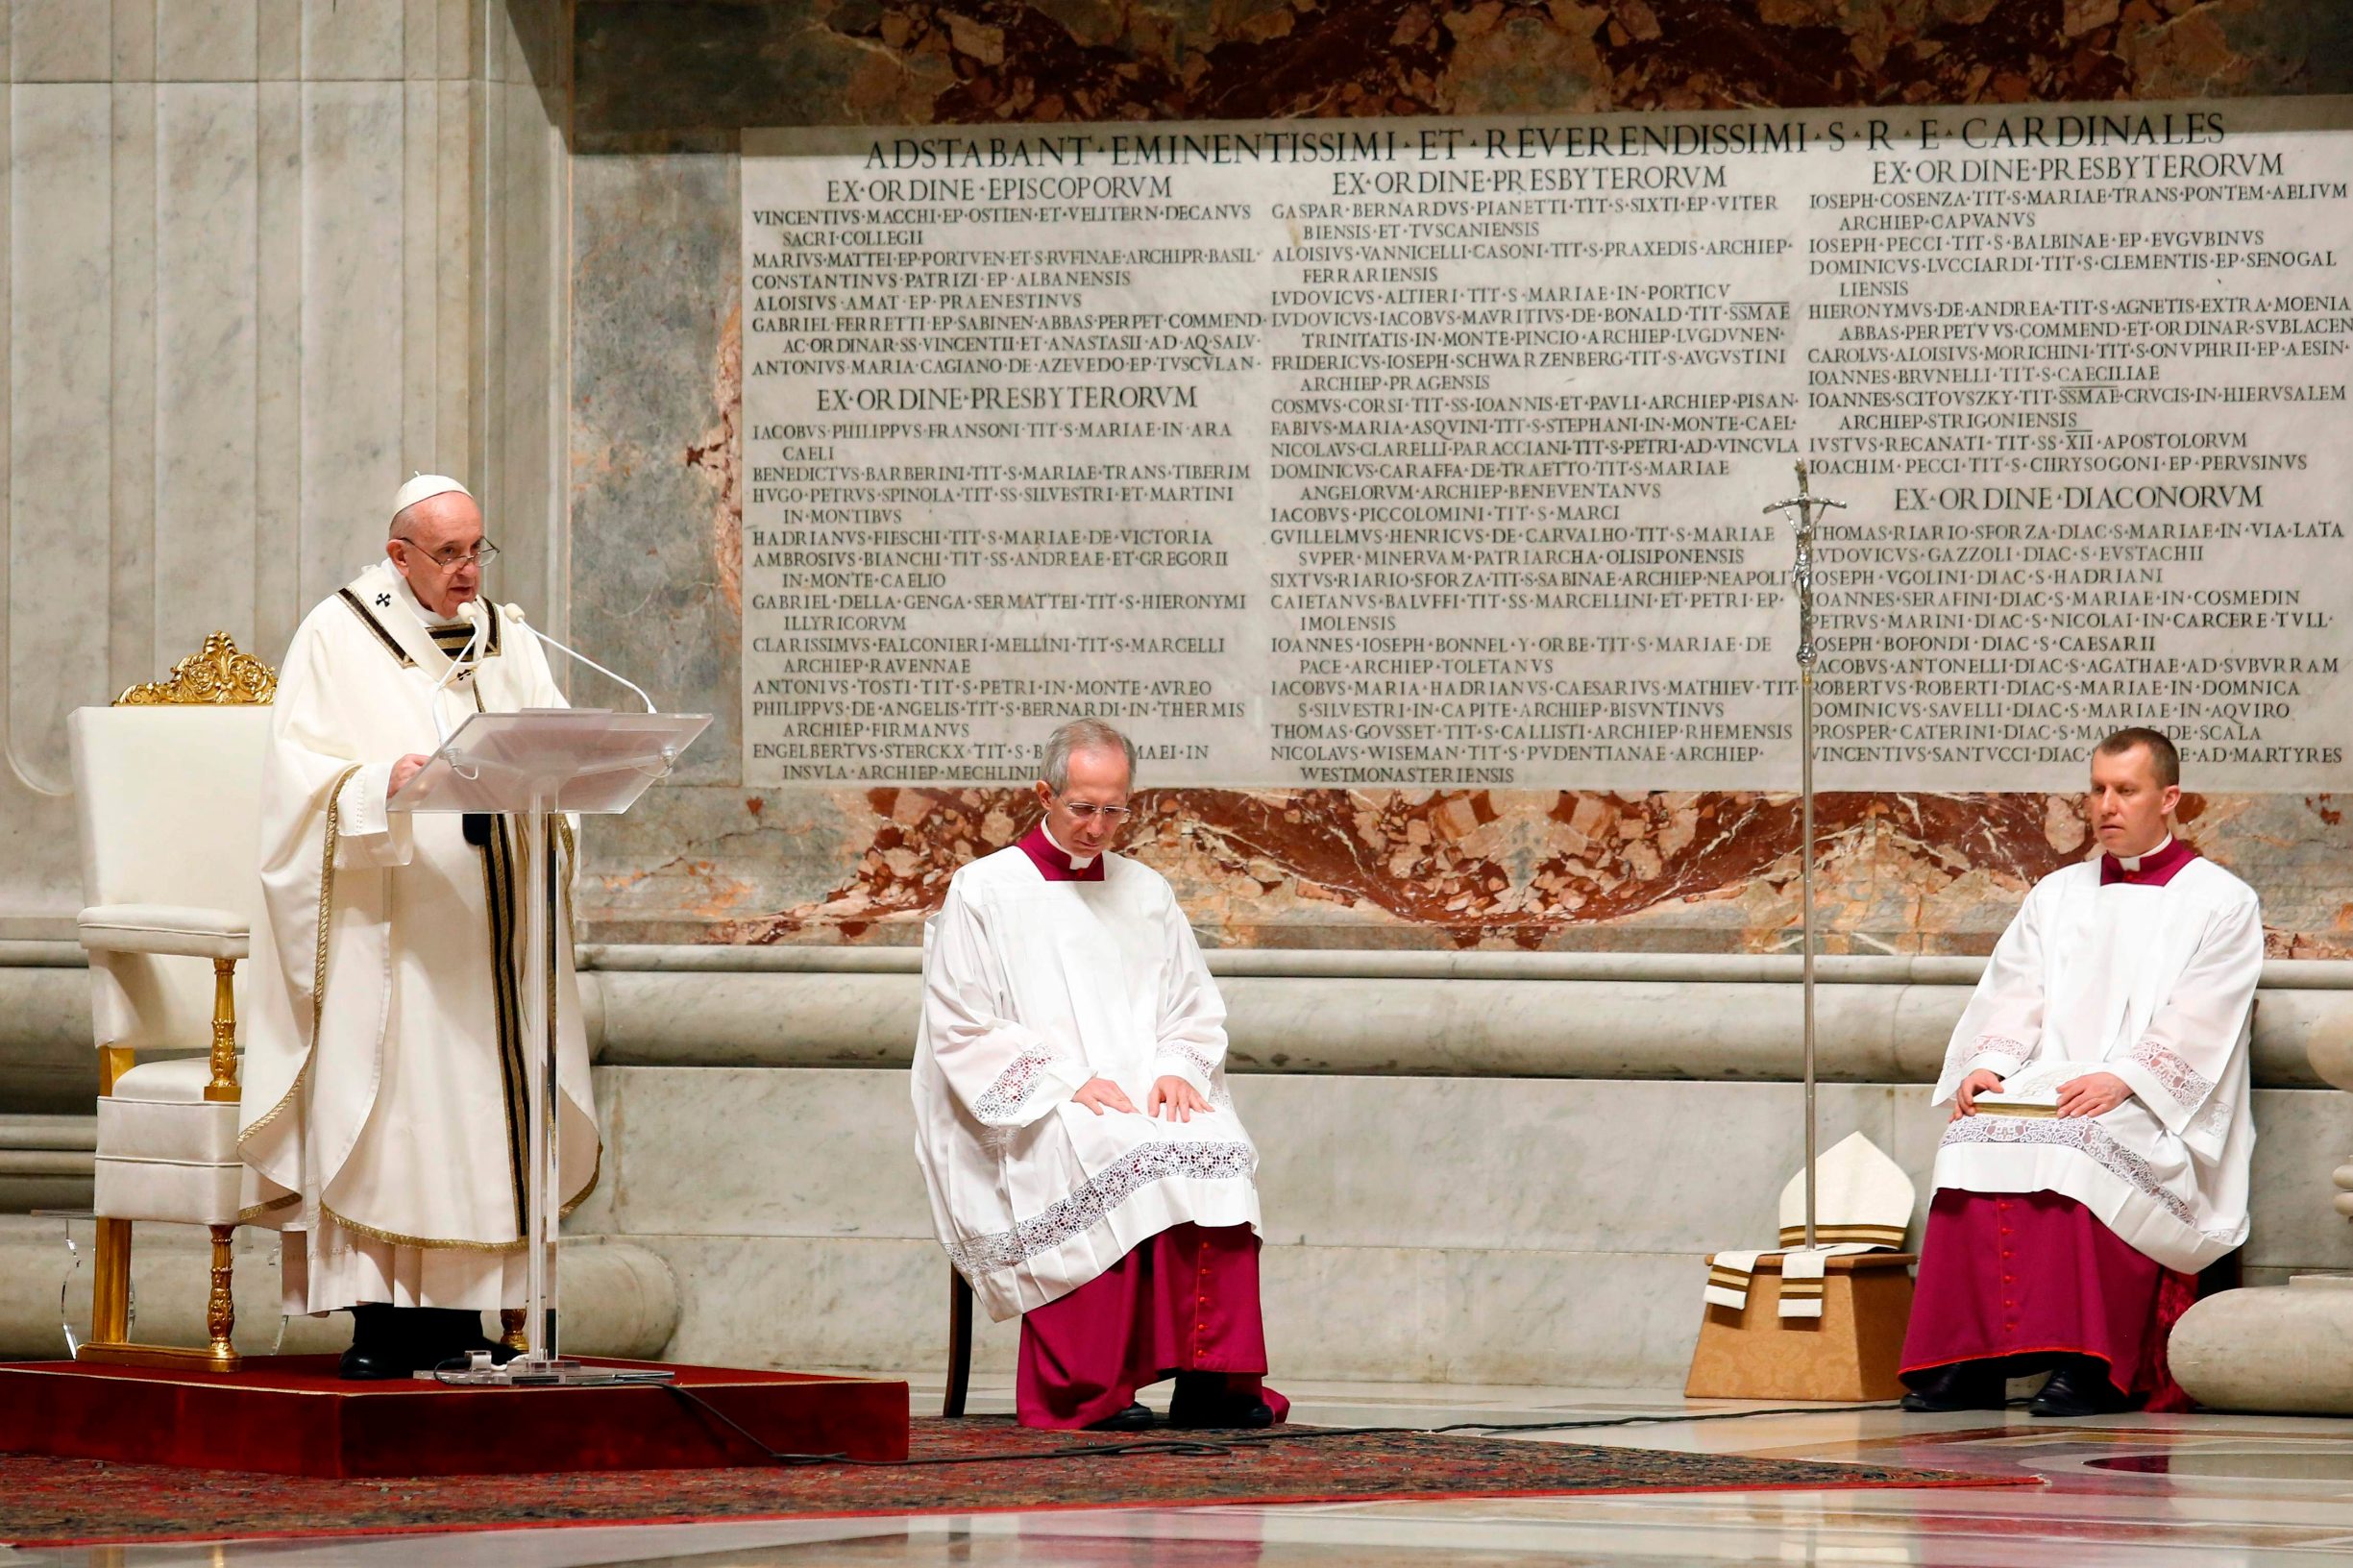 Pope Francis delivers a homily during Easter's Holy Saturday Vigil held behind closed doors at St. Peter's Basilica in the Vatican on April 11, 2020 during the lockdown aimed at curbing the spread of the COVID-19 infection, caused by the novel coronavirus. (Photo by REMO CASILLI / POOL / AFP)